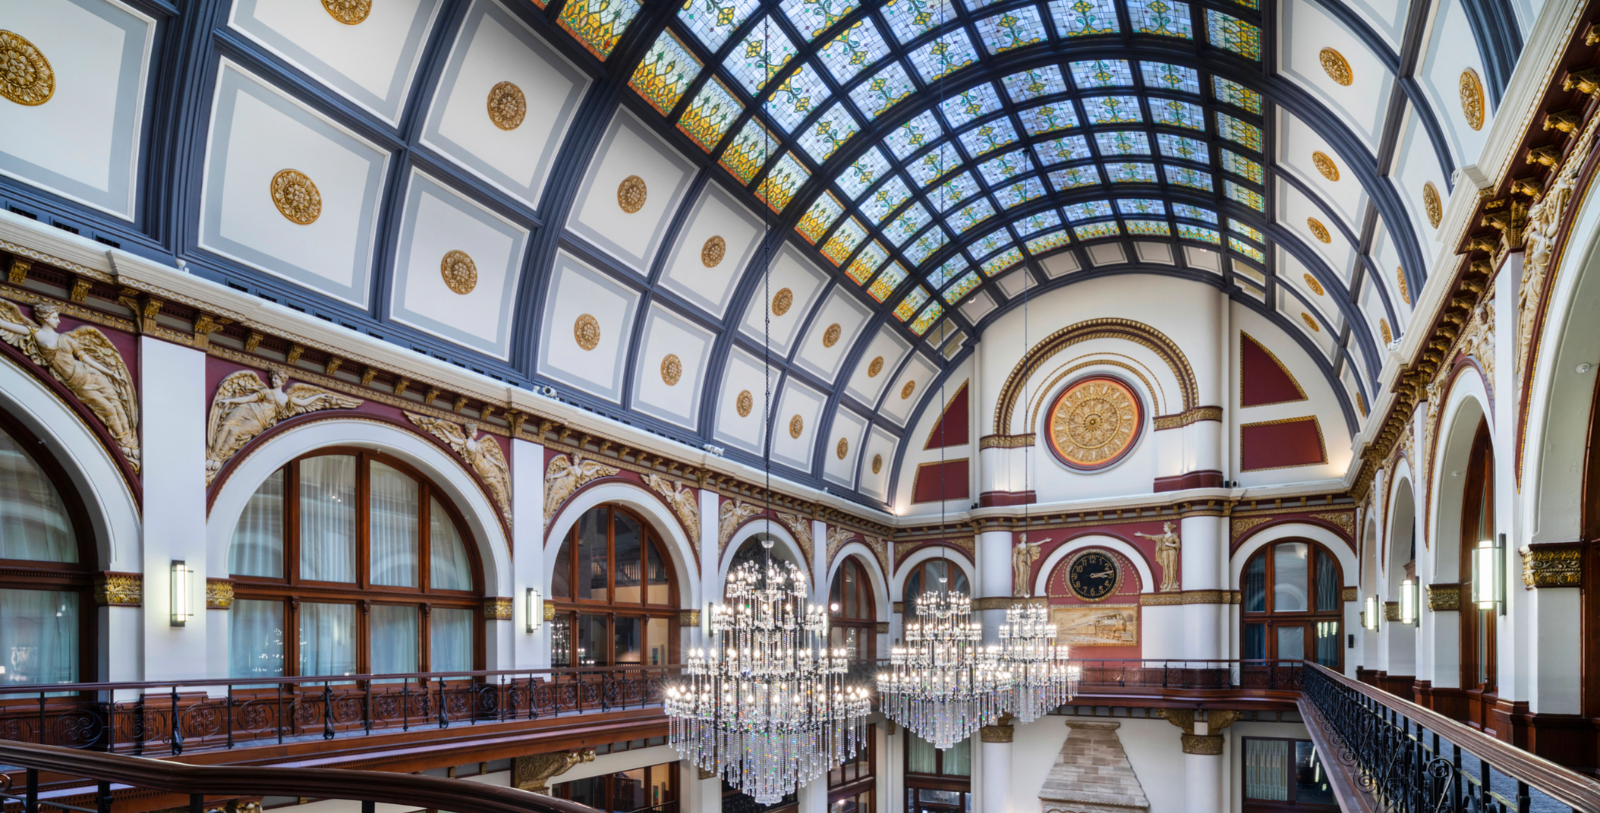 Image of an arched coffered ceiling with ornamentation and chandeliers at The Union Station Nashville Yards, a member of Historic Hotels of America since 2015, located in Nashville, Tennessee